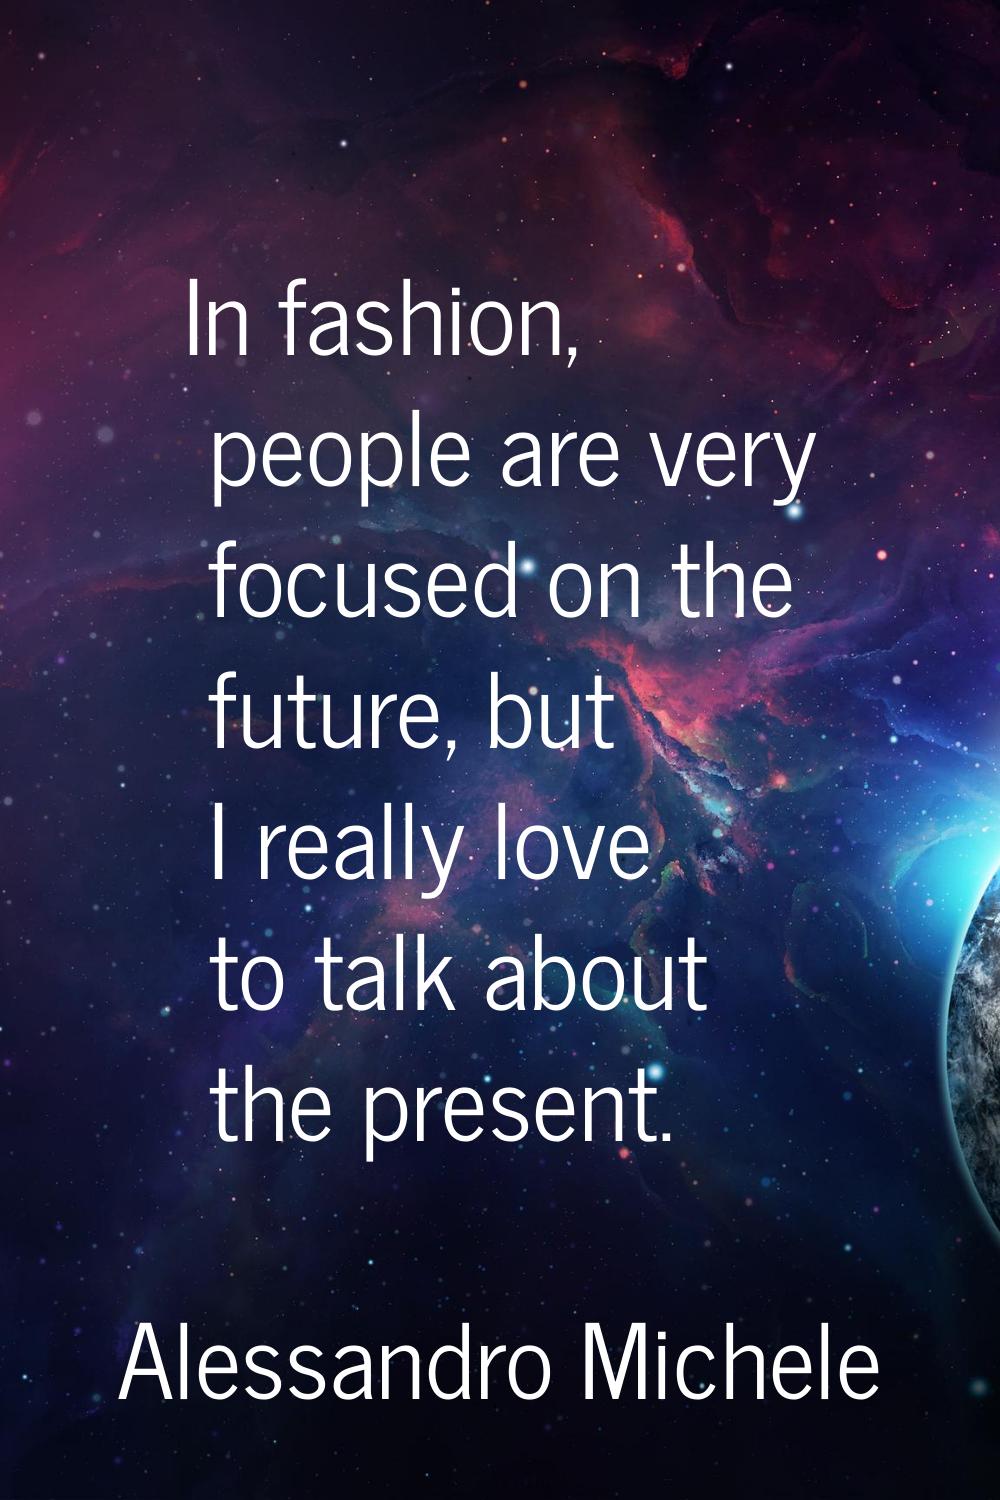 In fashion, people are very focused on the future, but I really love to talk about the present.